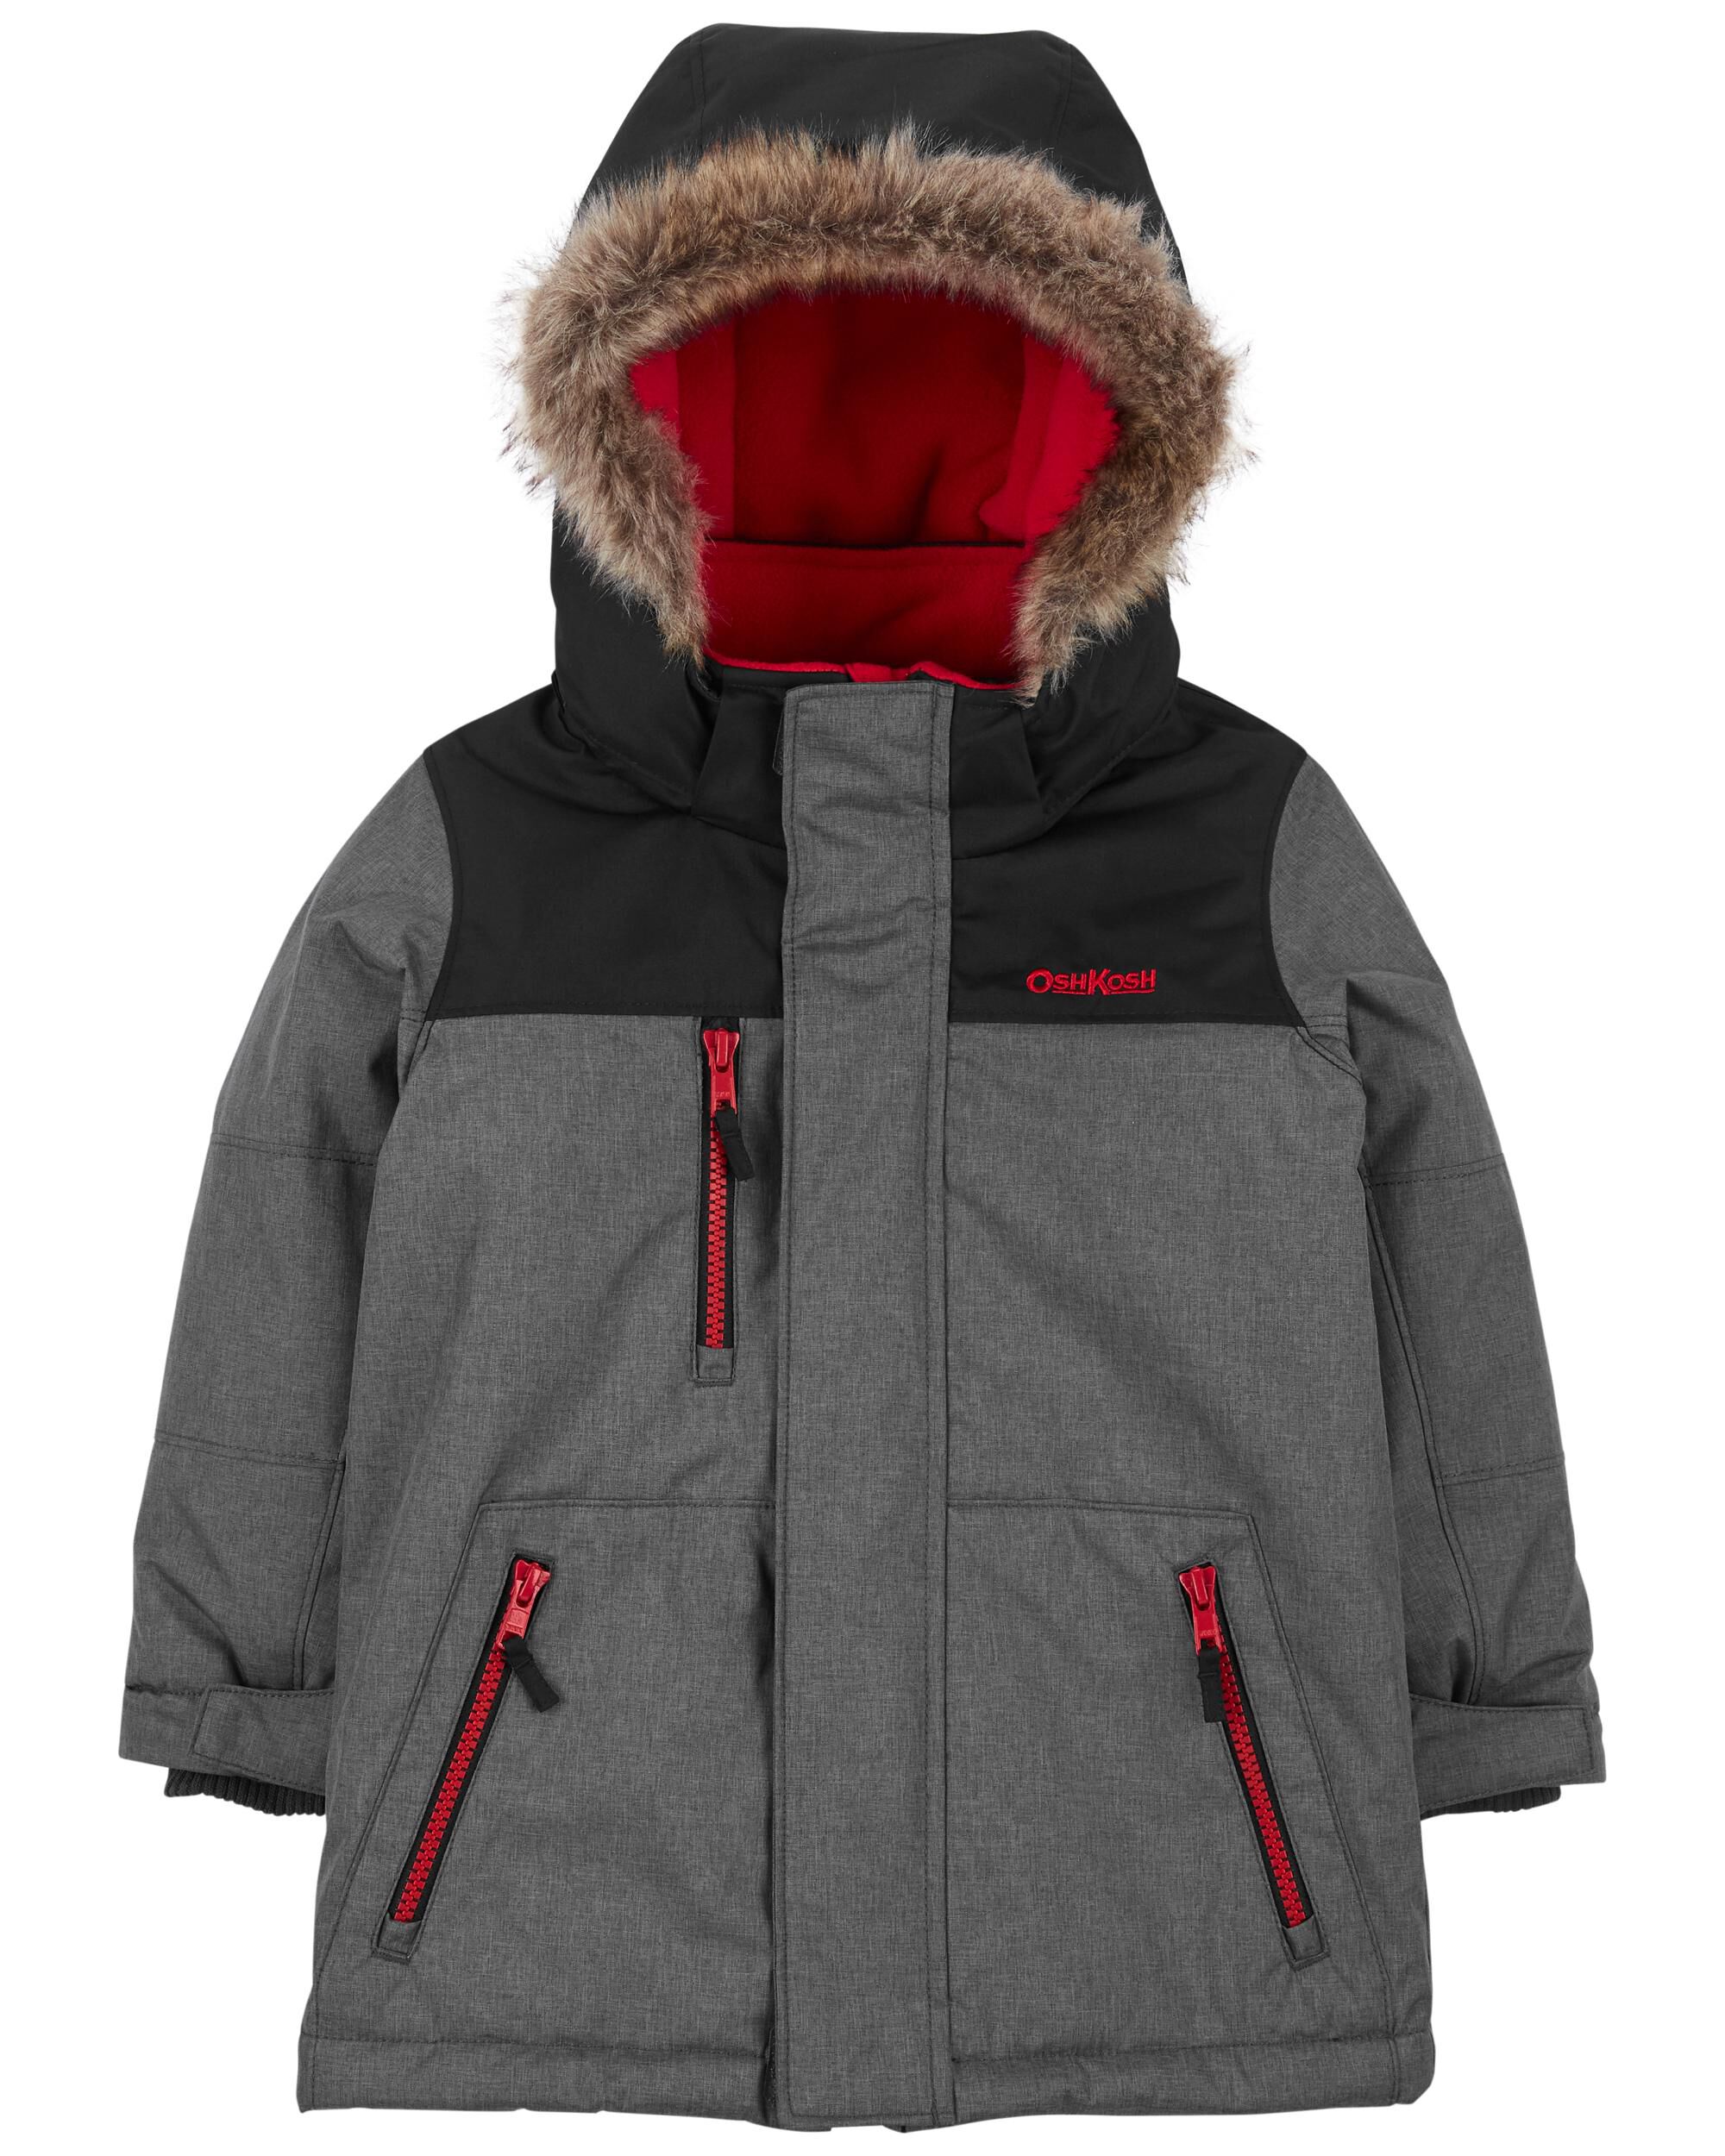 Toddler Heavyweight Parka with Detachable Hood